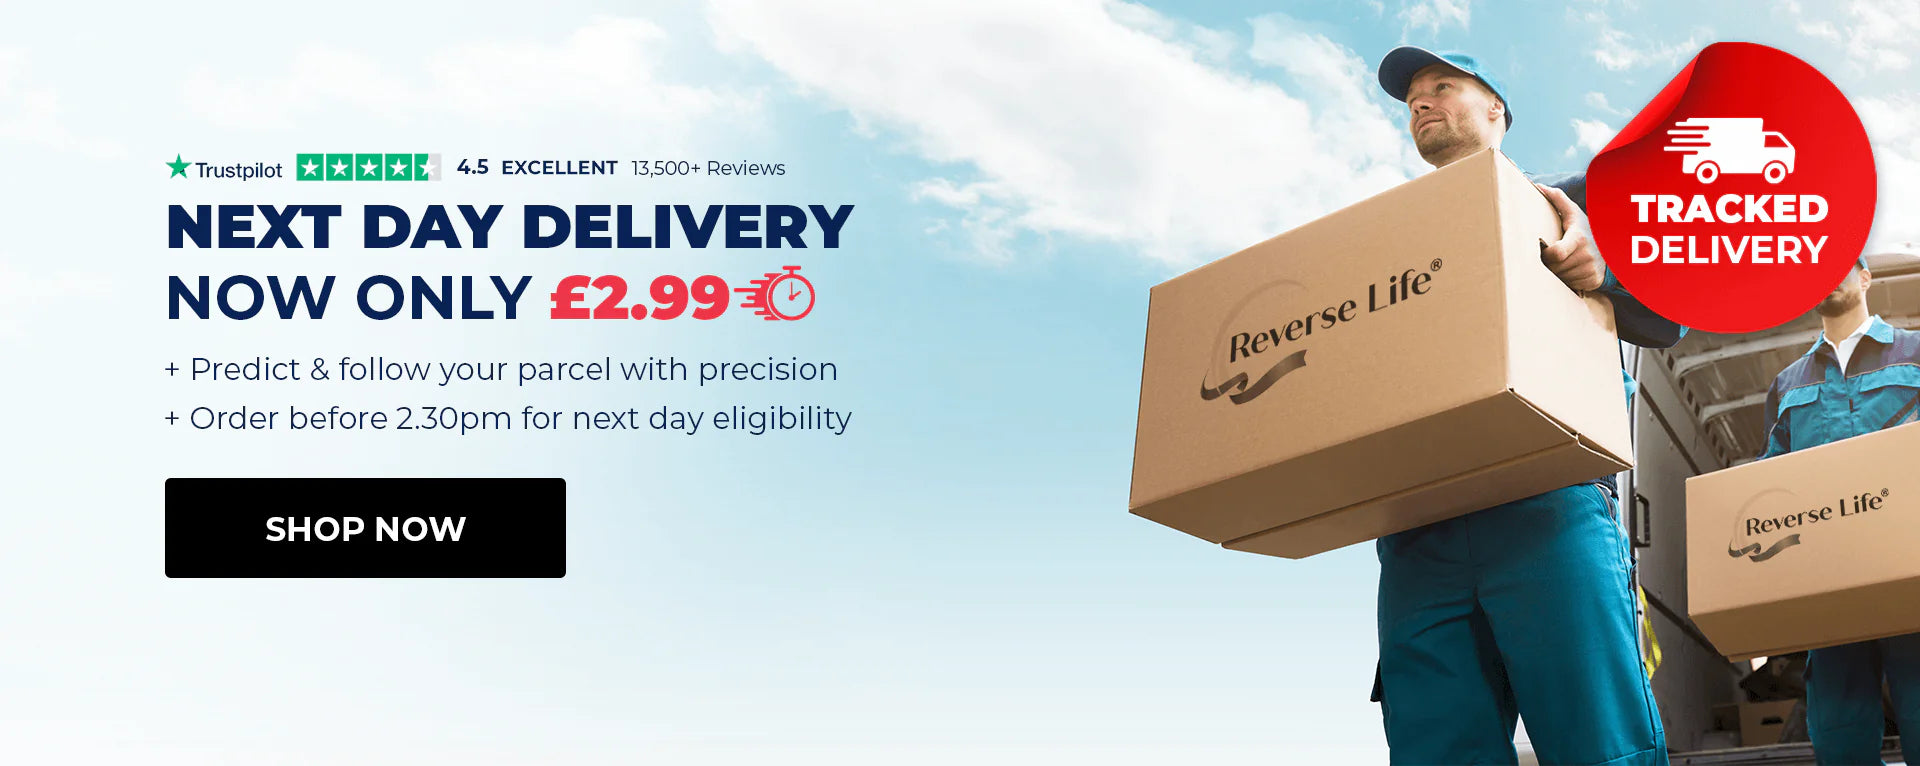 Next day delivery now only £2.99. Predict & follow your parcel with precision. Order before 2:30pm for next day eligibility